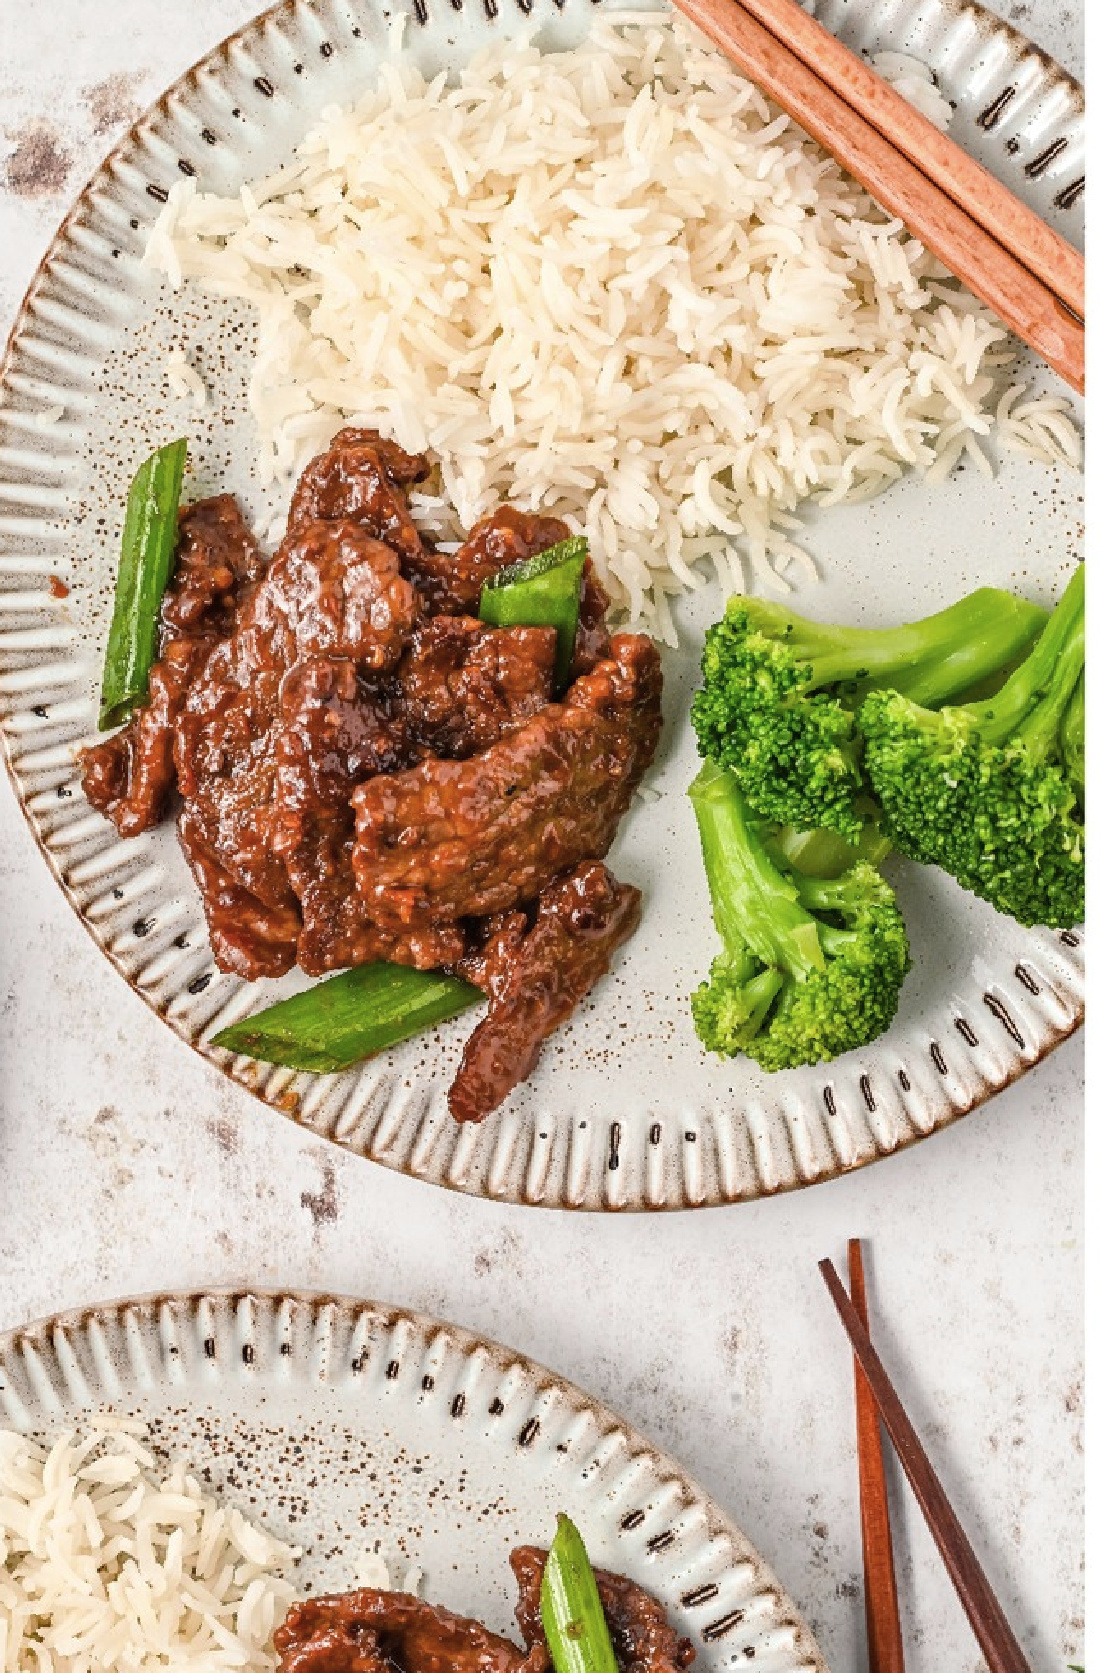 A delicious serving on Mongolian beef with steamed rice and broccoli